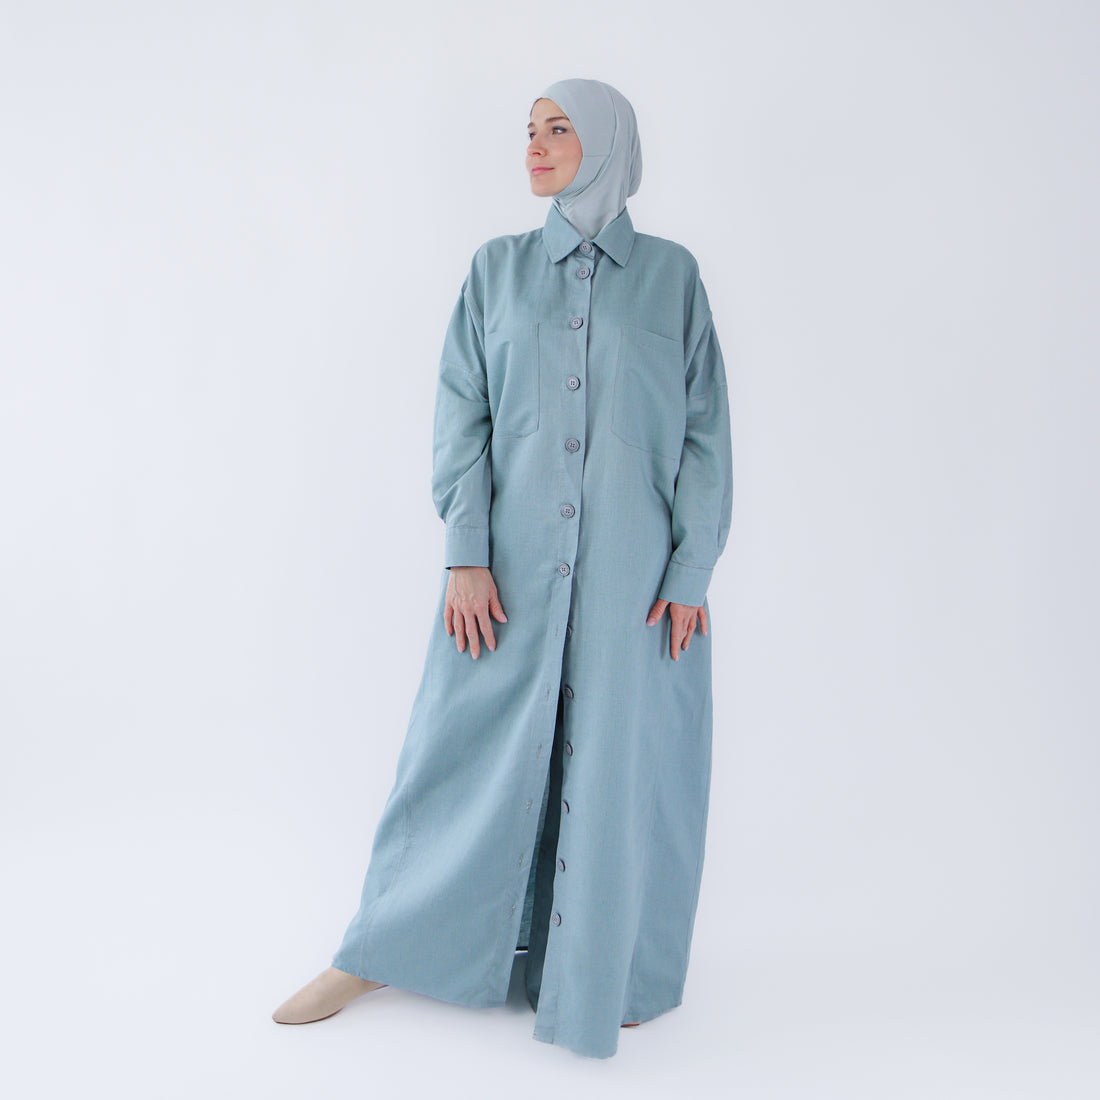 Abaya dress style maxi dress for women with wide trousers "Blue Linen"